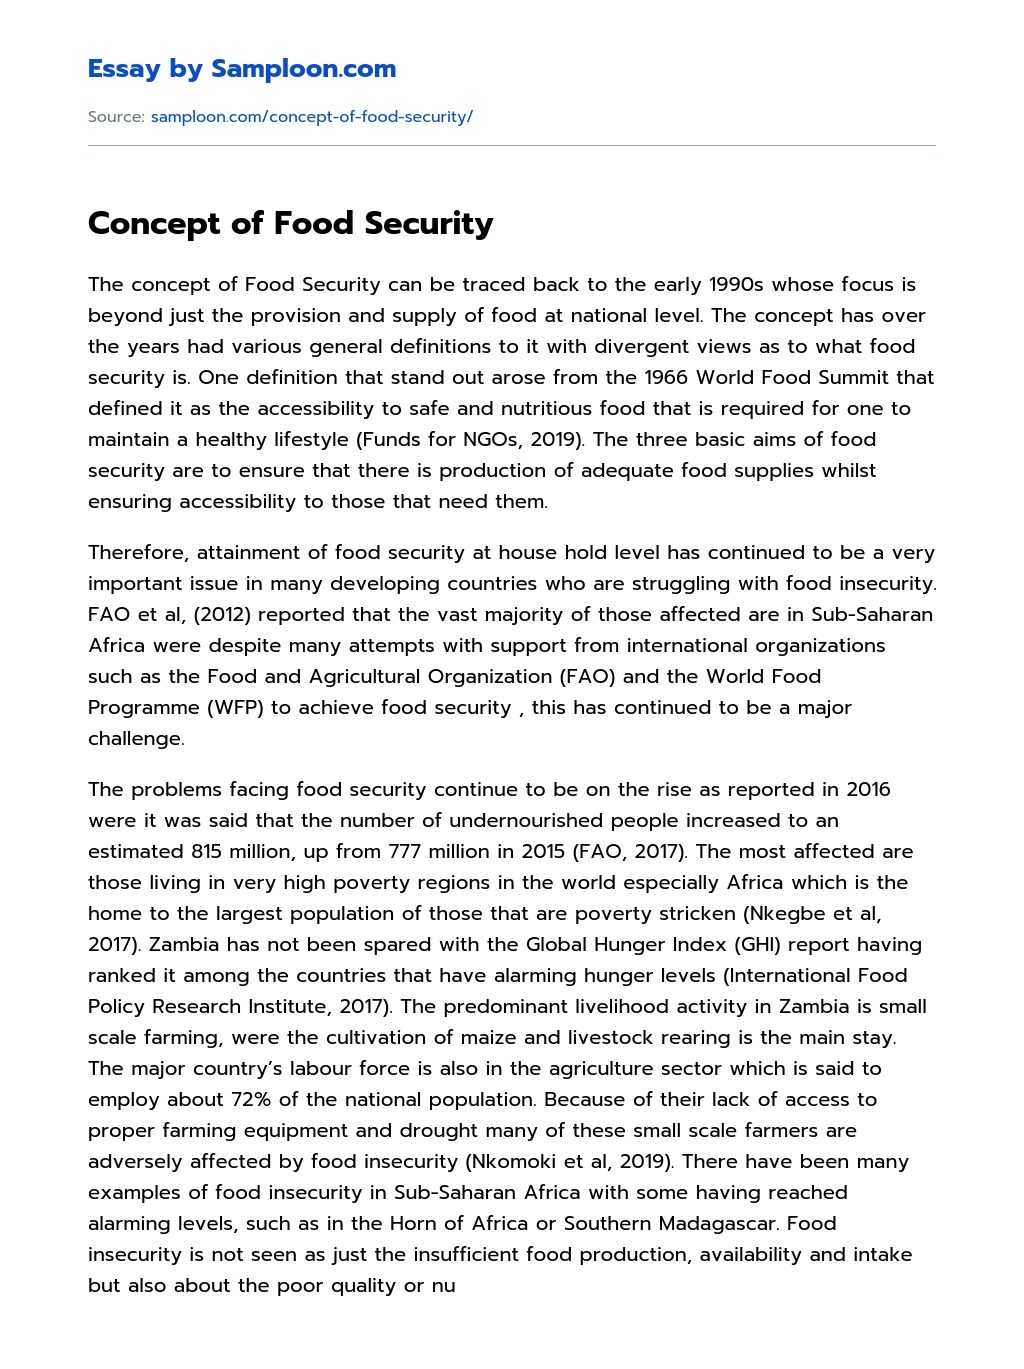 Concept of Food Security essay